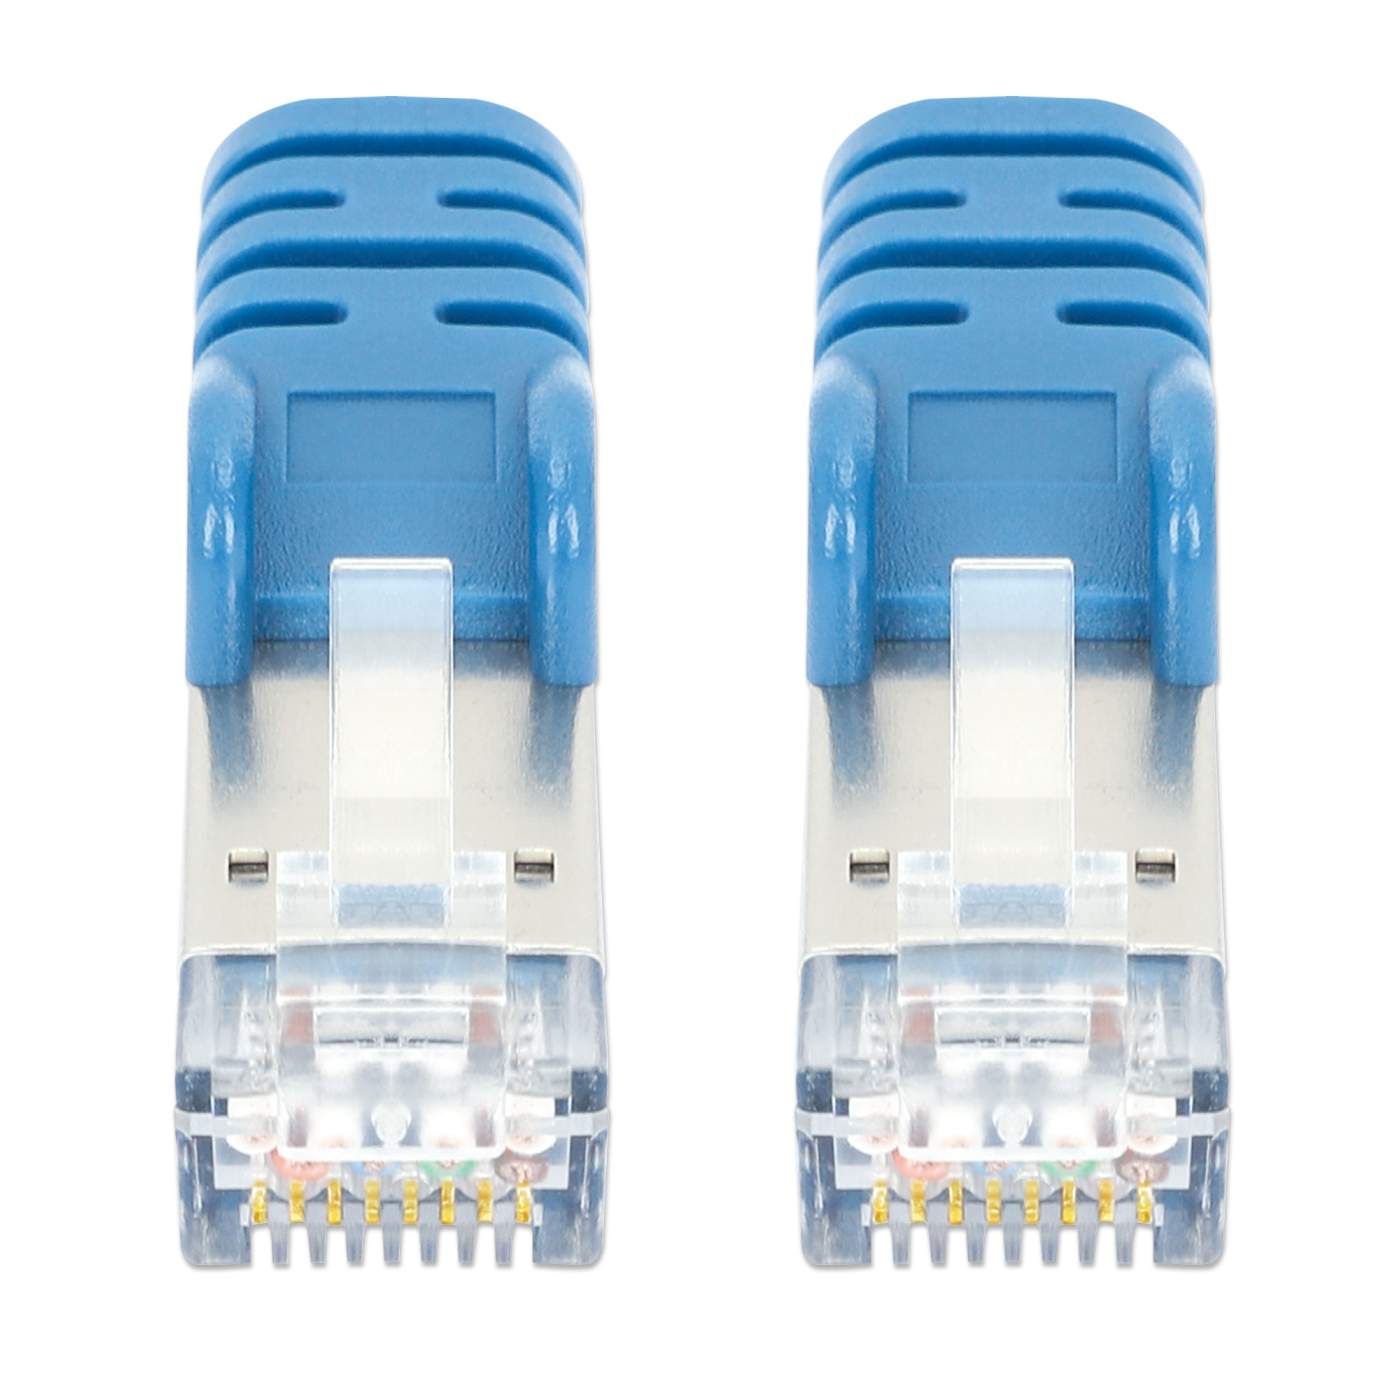 Cat8.1 S/FTP Network Patch Cable, 10 ft., Blue Image 3